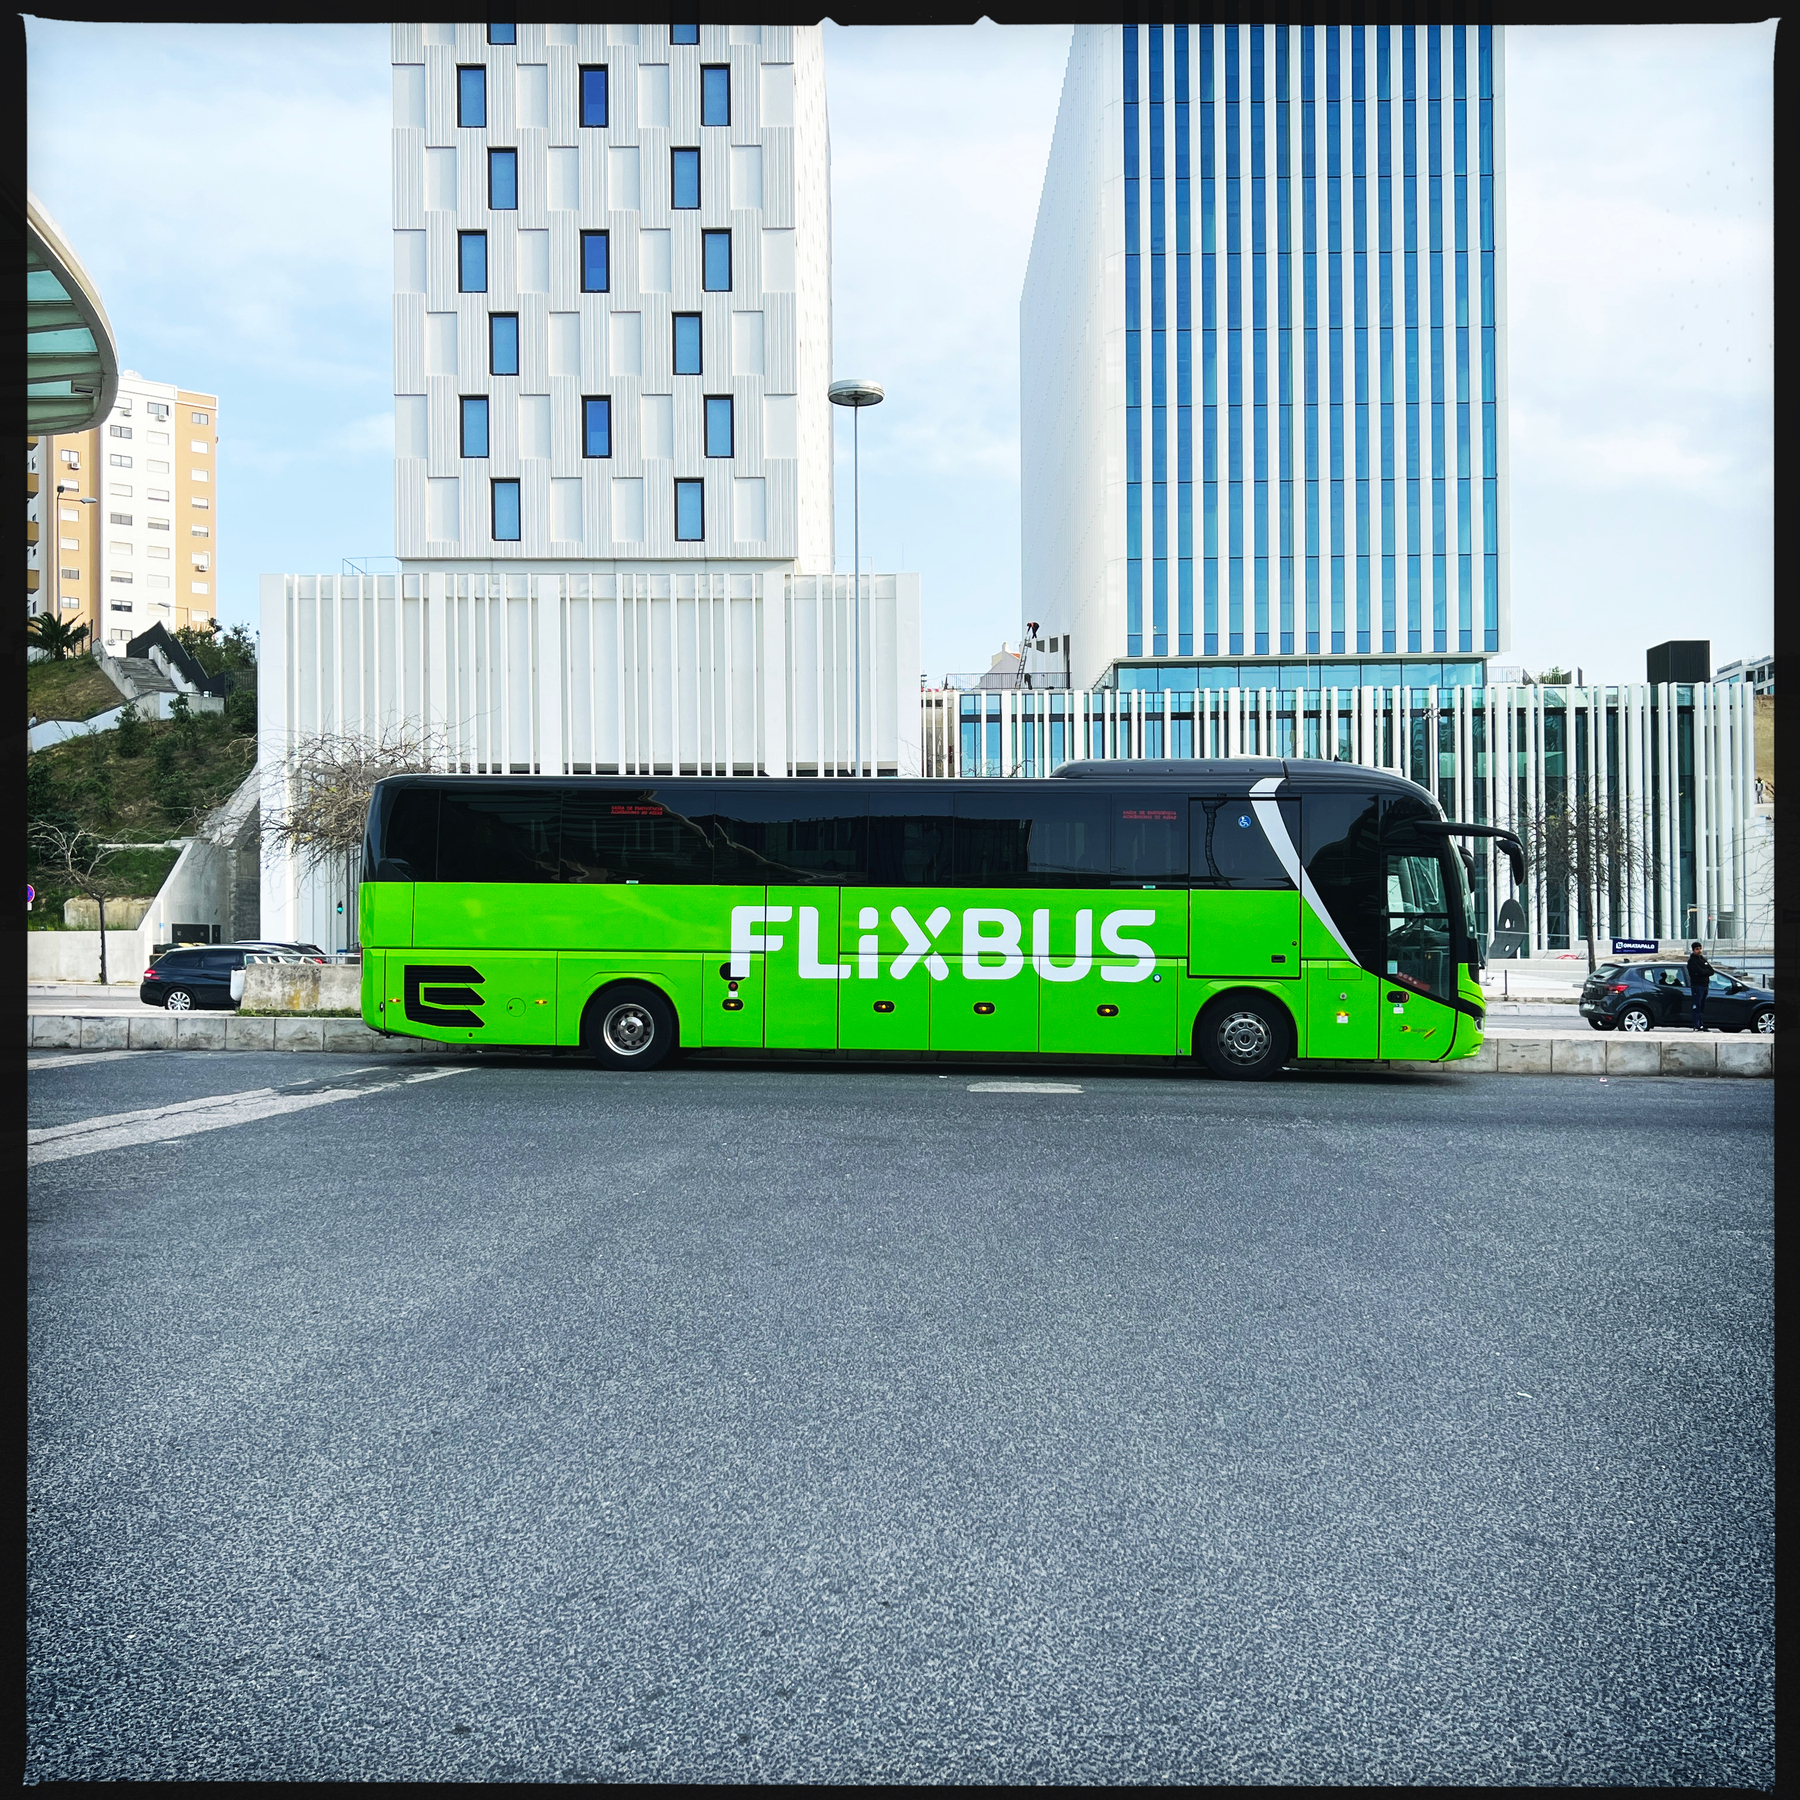 a green bus with “flixbus” written on the side, parked next to modern looking buildings